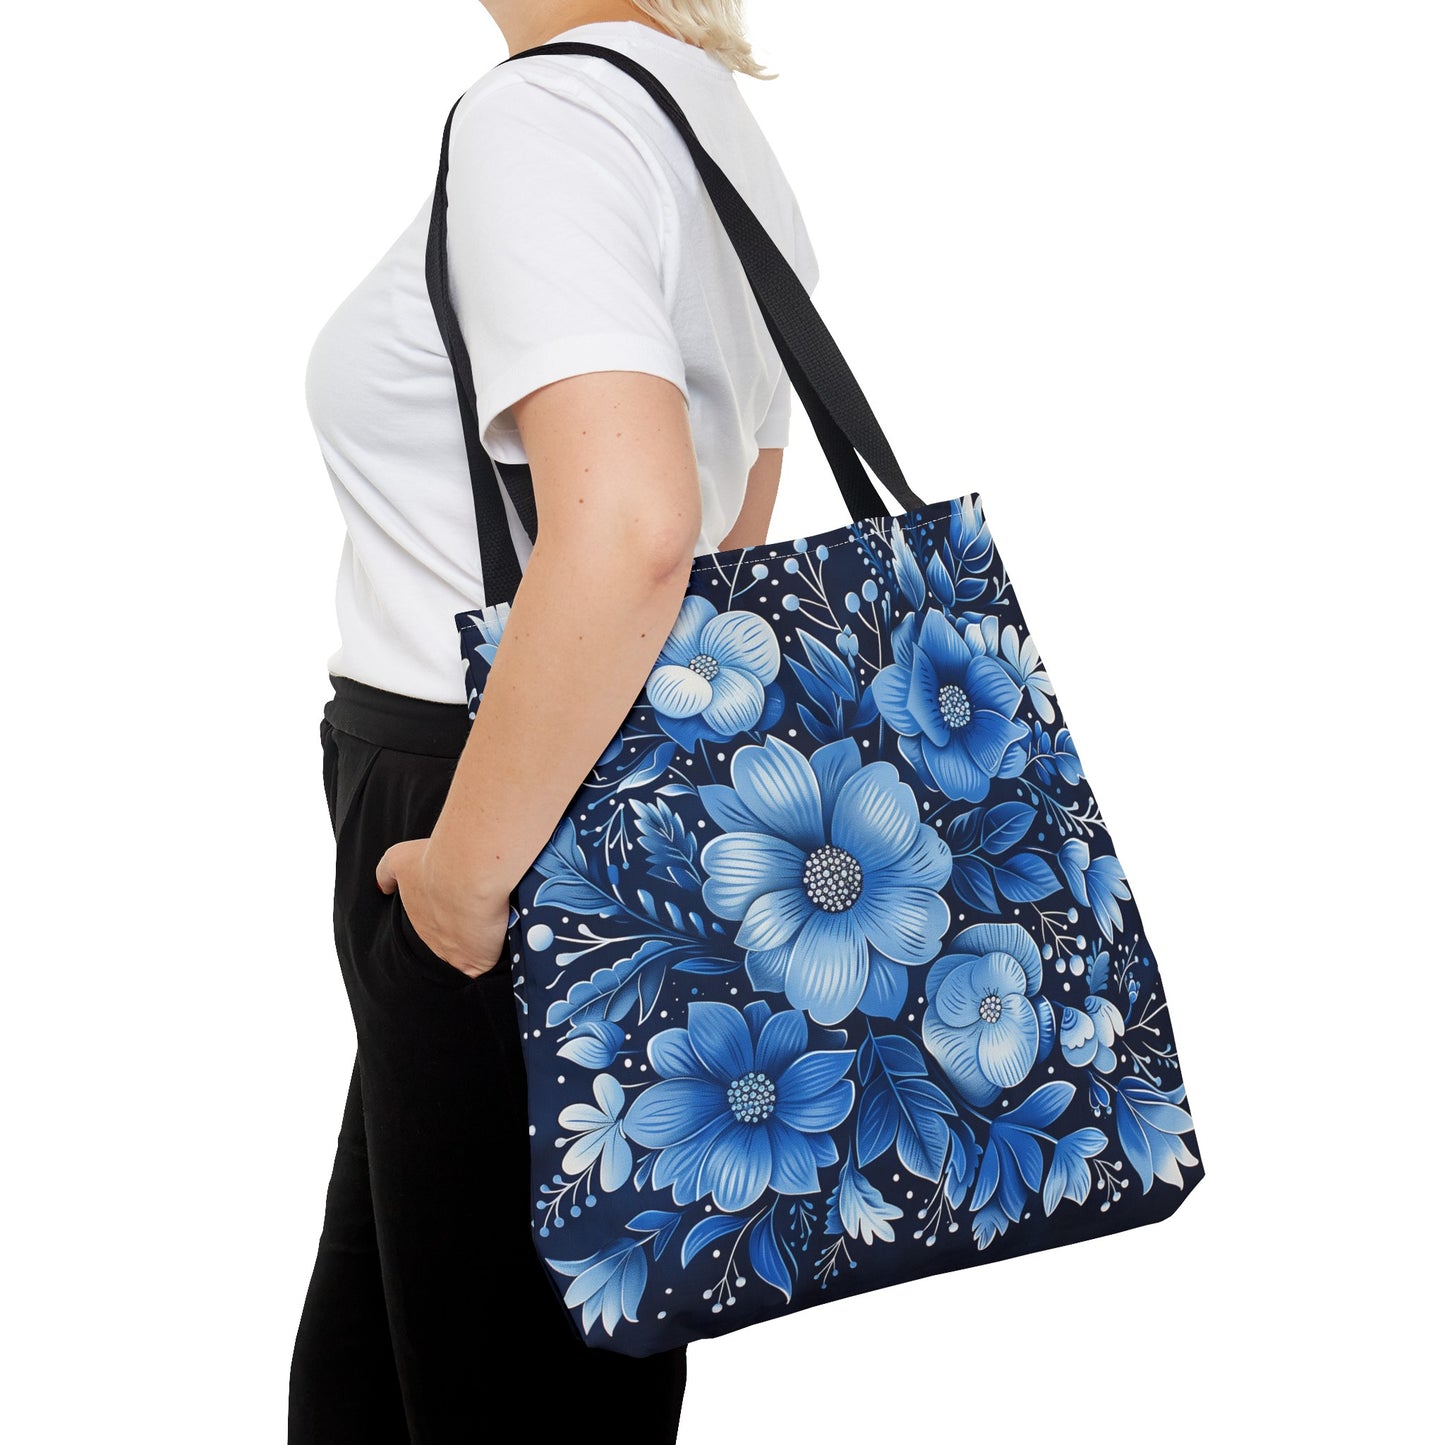 Blue Floral Tote Bag, Navy Flowers Cute Canvas Shopping Small Large Travel Reusable Aesthetic Shoulder Bag Purse